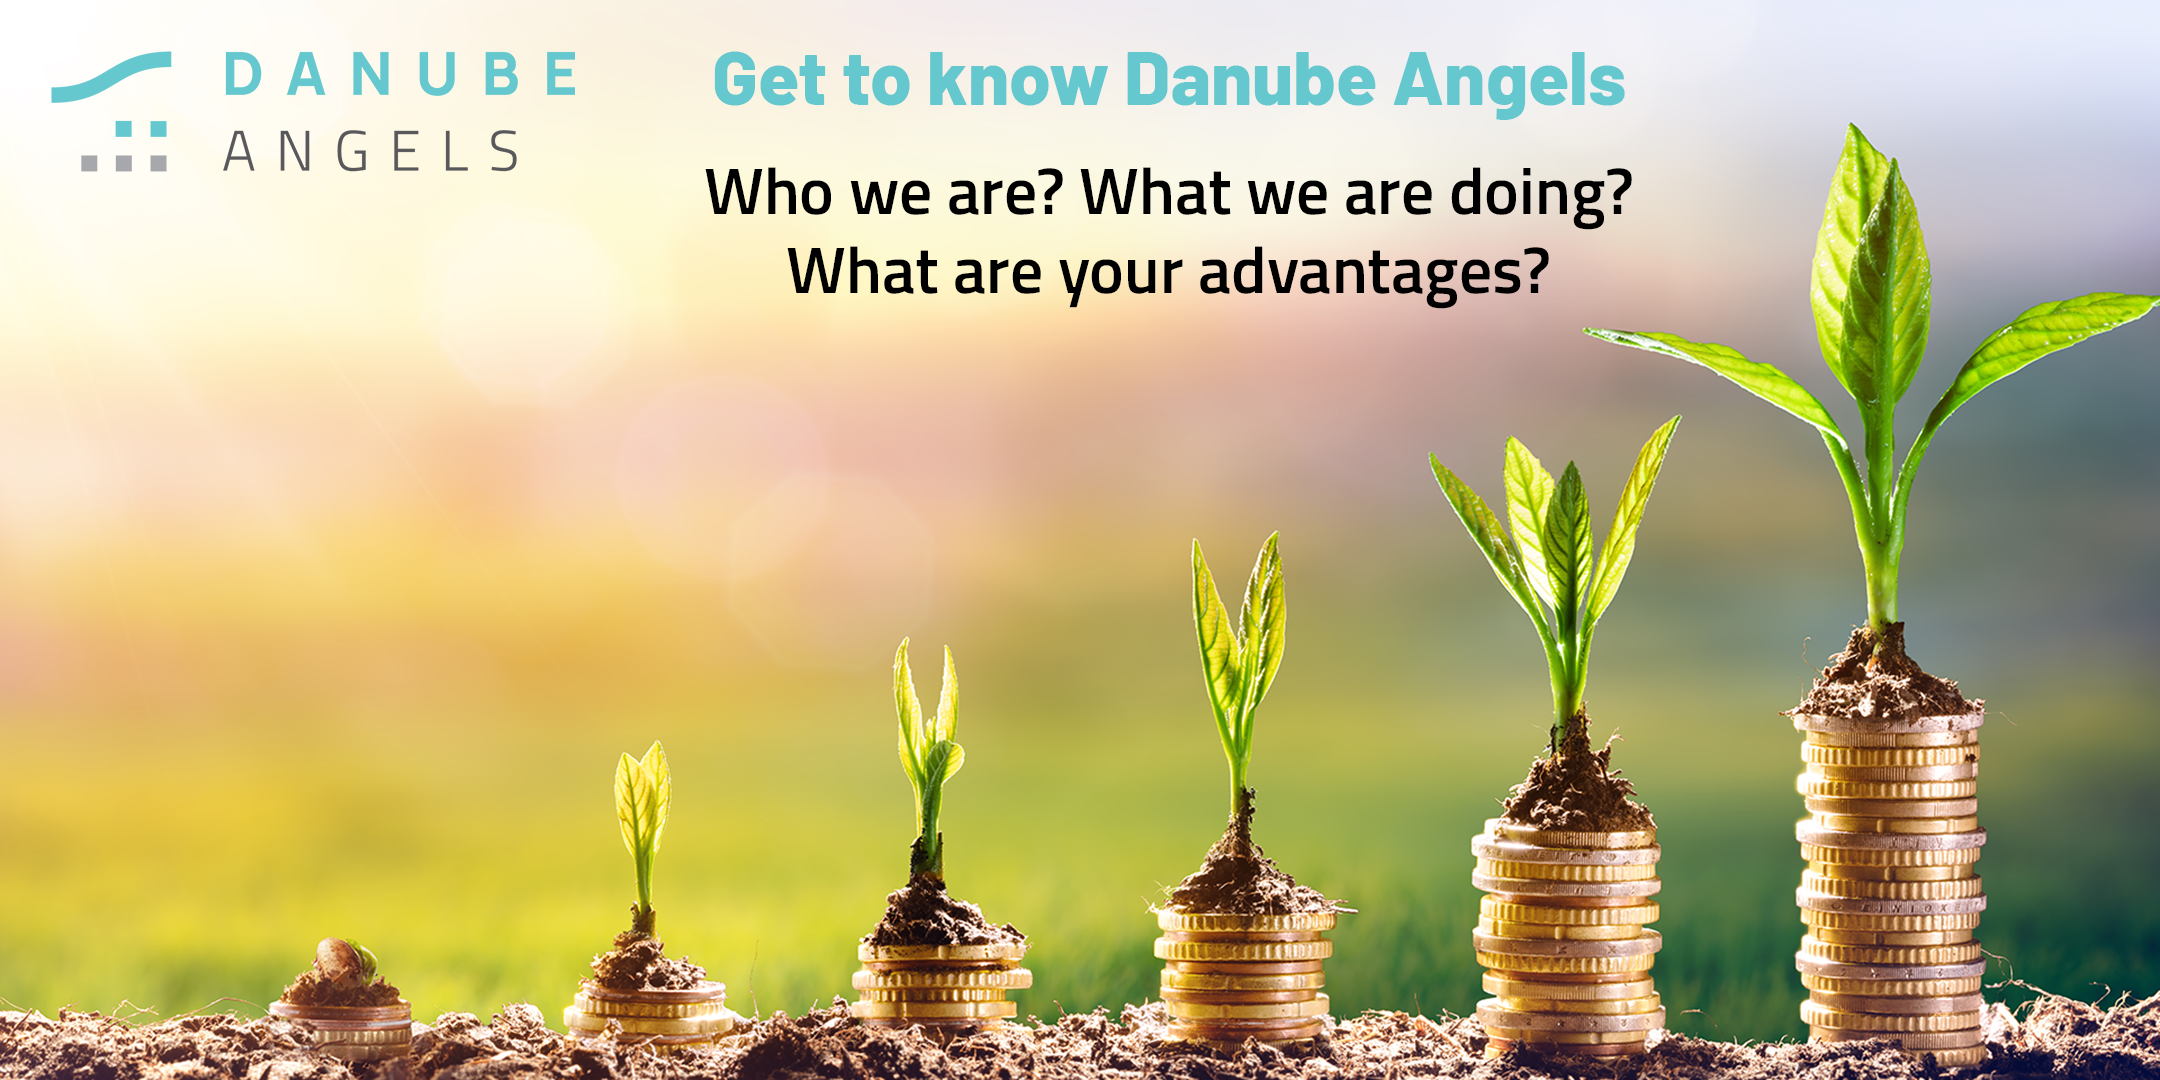 Online-Event 14.12.2022: Get to know Danube Angels